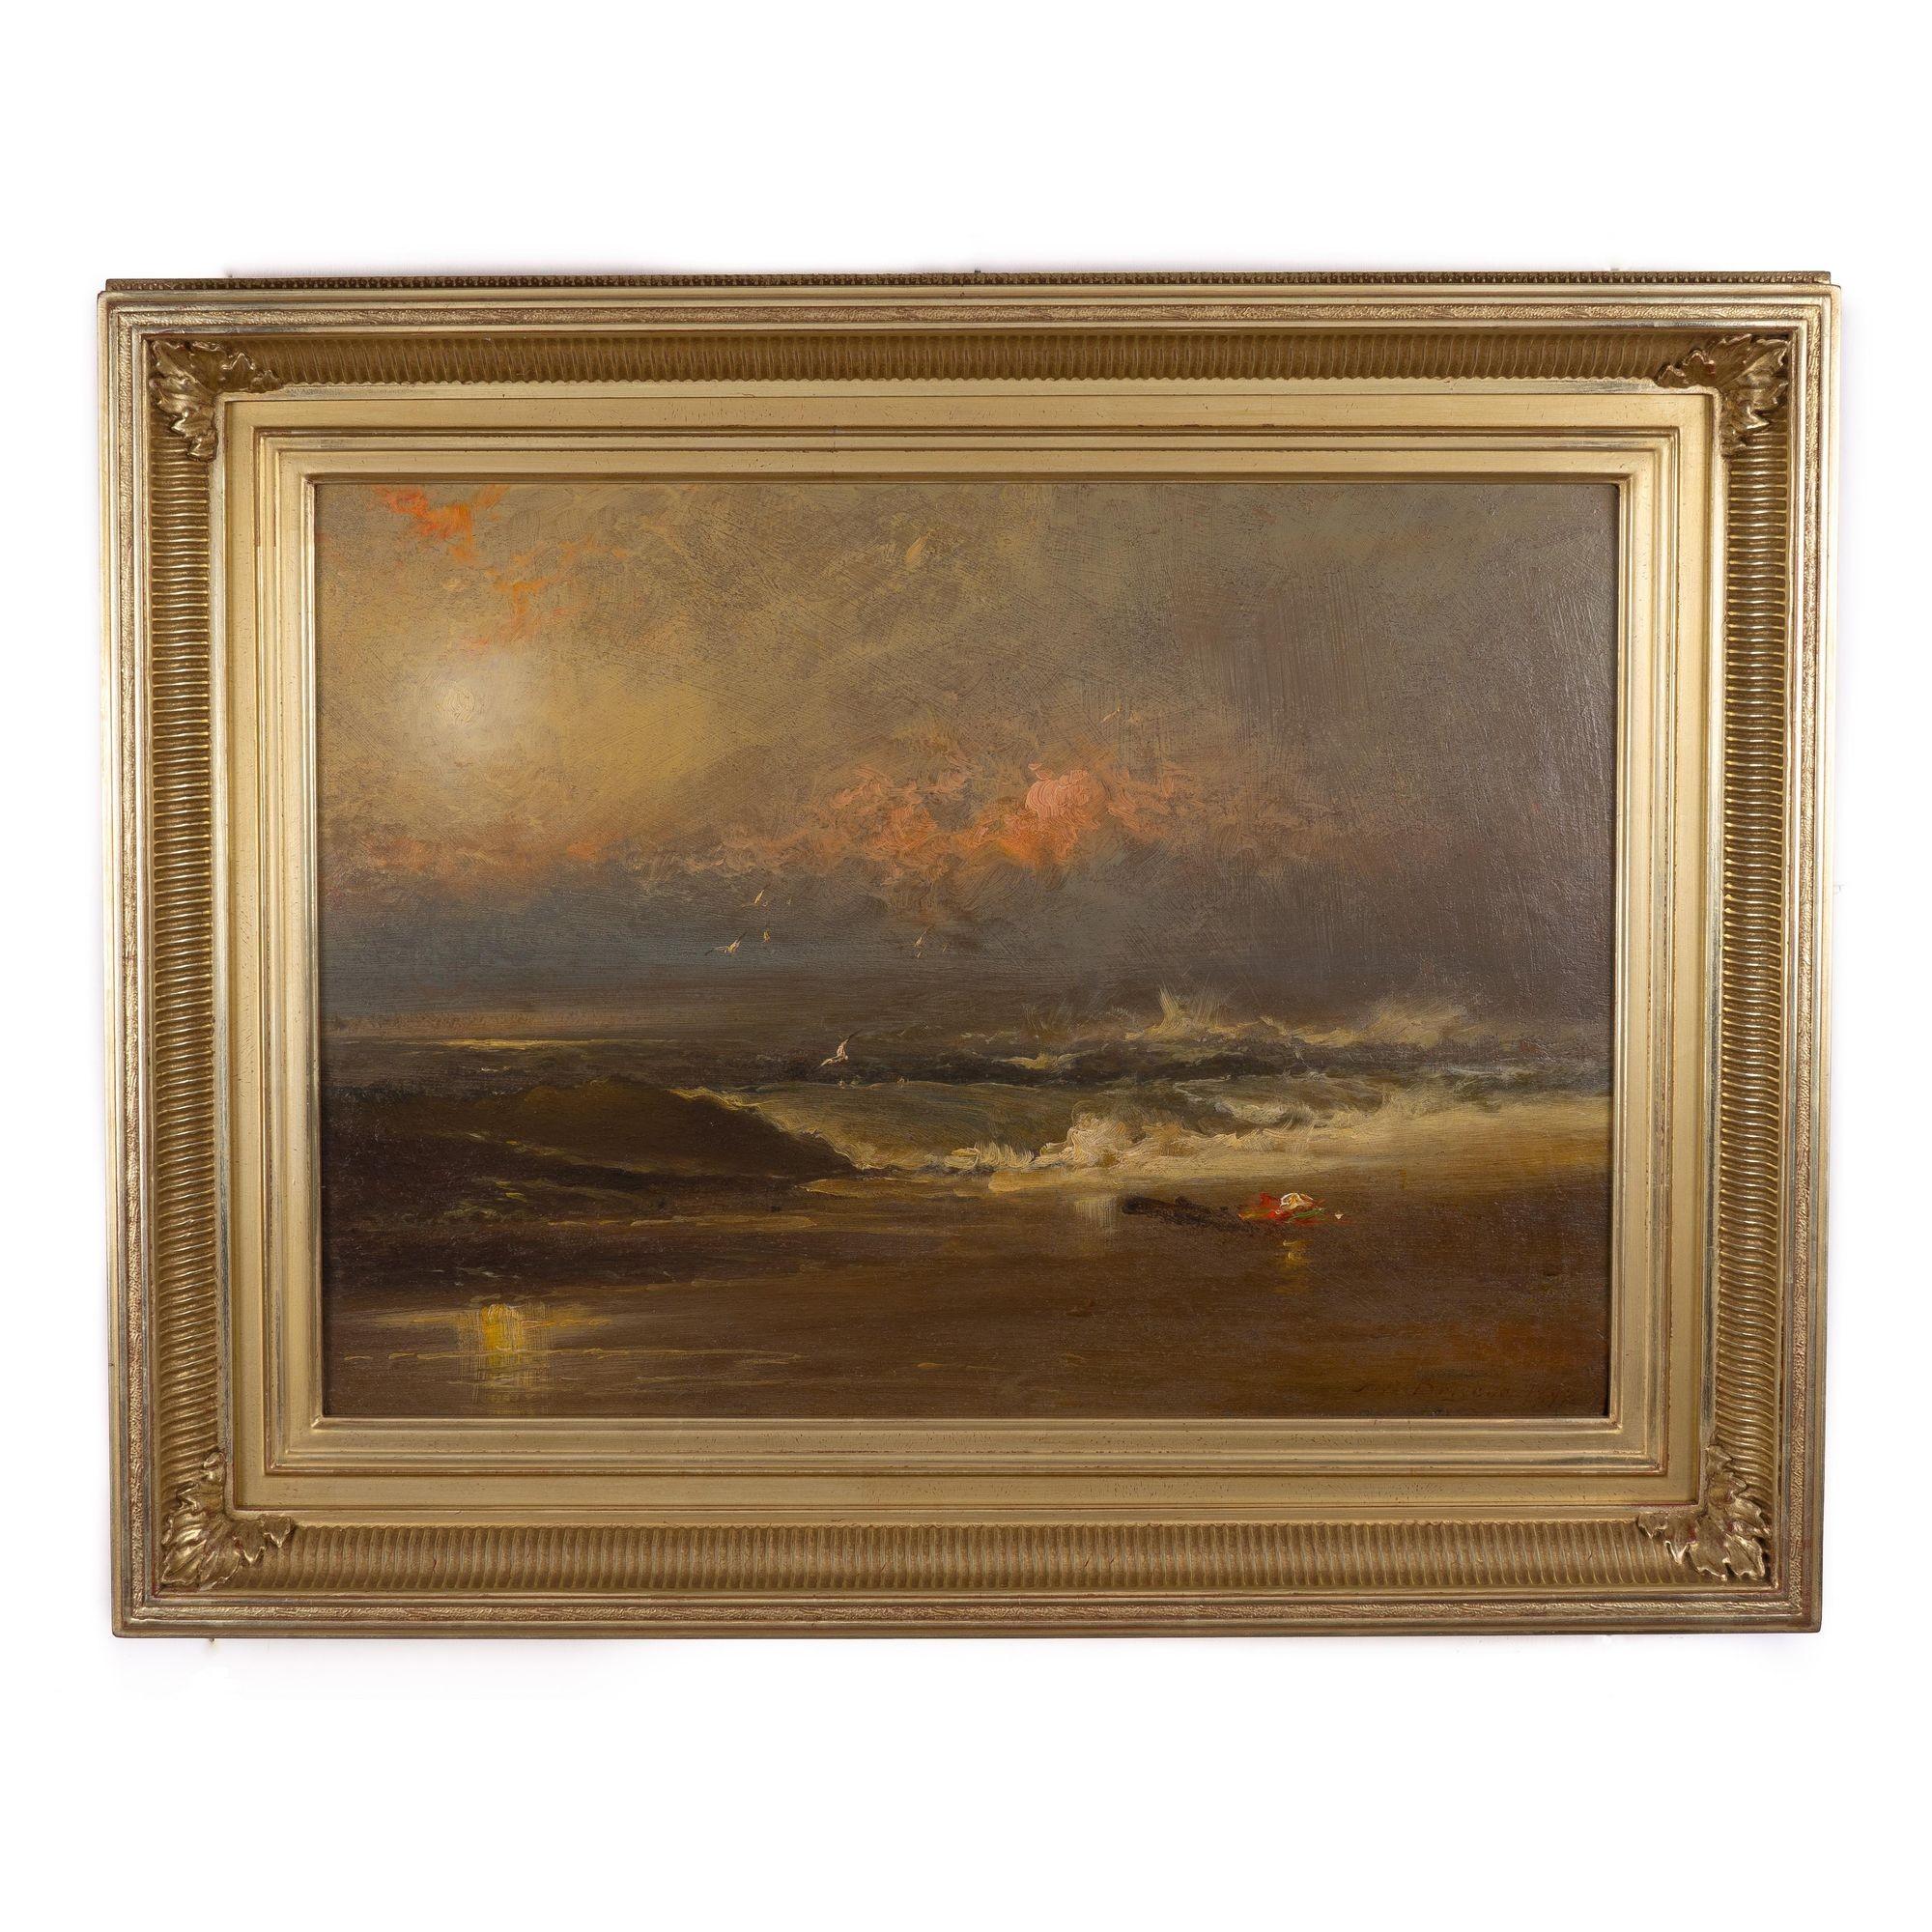 Late 19th Century Seascape Oil Painting on by Franklin Dullin Briscoe, 1982 For Sale